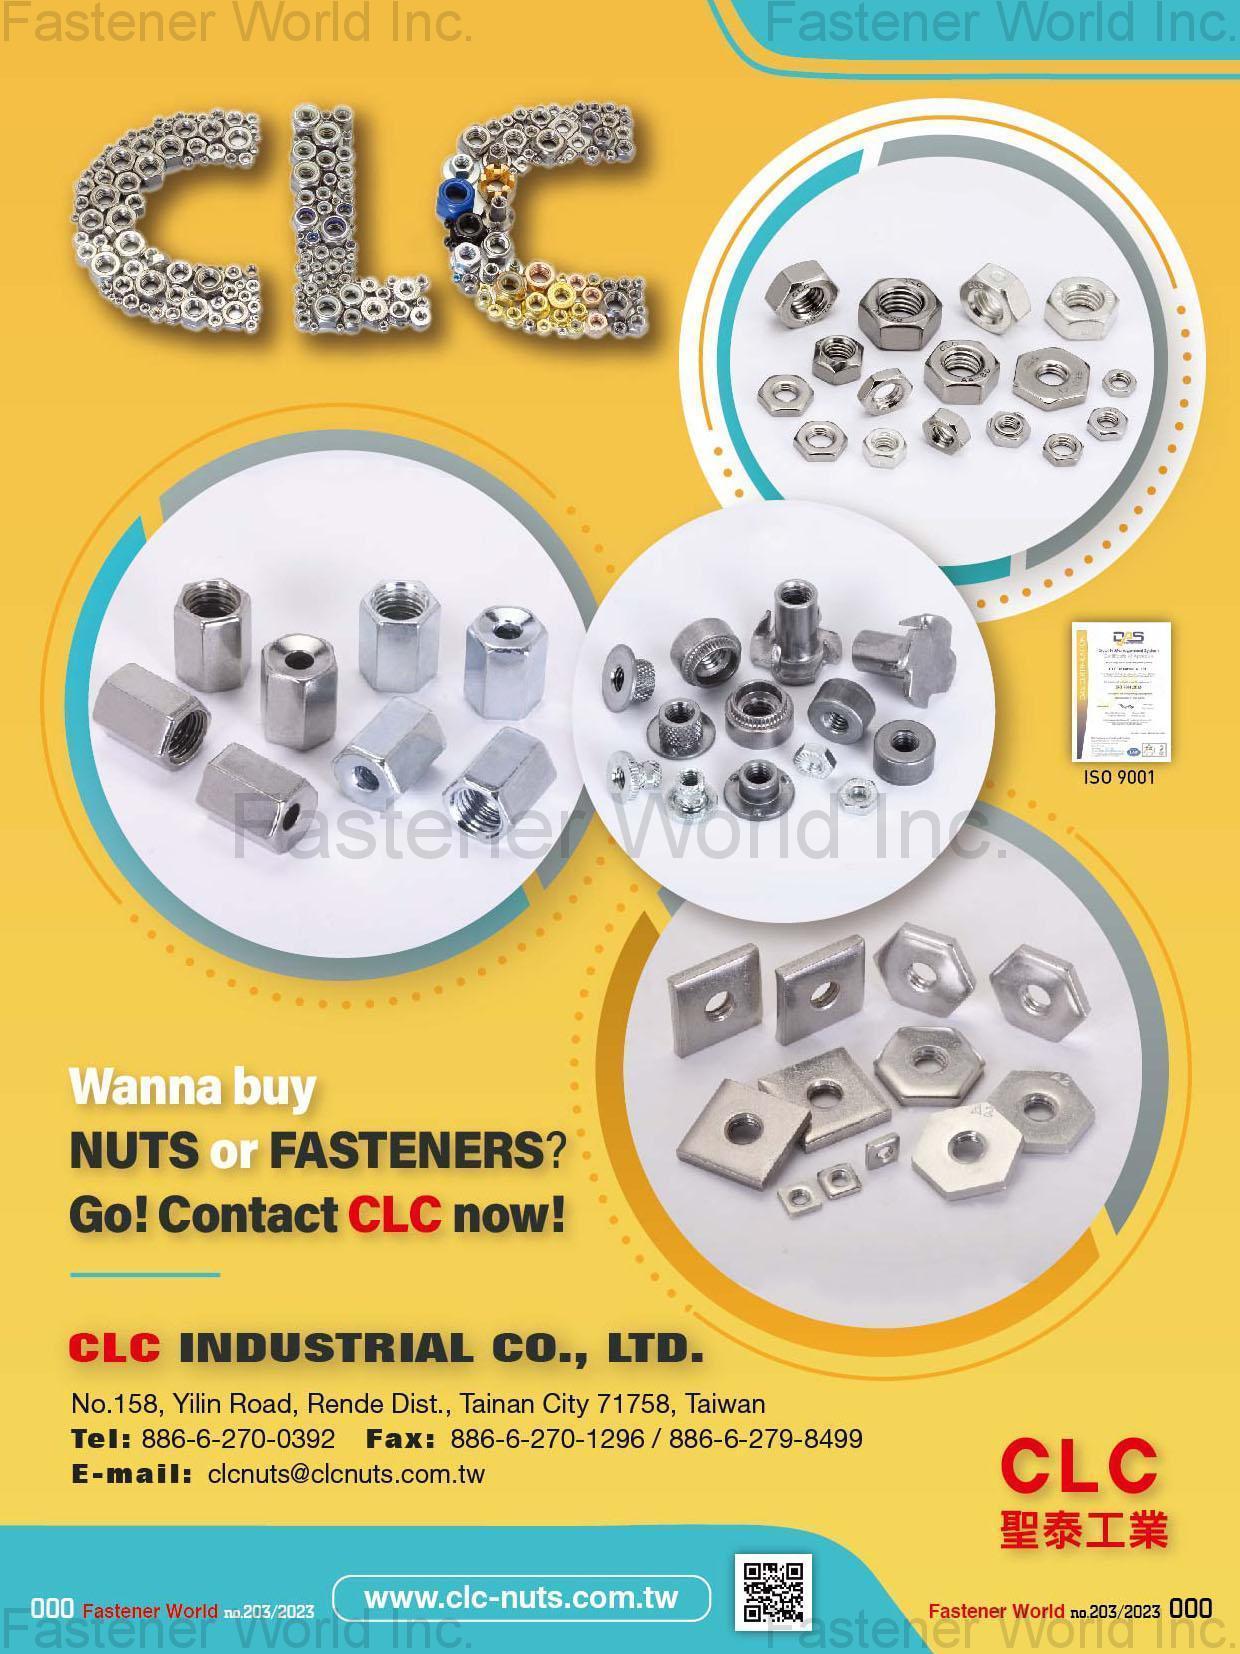 CLC INDUSTRIAL CO., LTD. , Nylon Insert Locknuts,DIN982,DIN985,Hex Machine Screw Nuts,Hex Finish Nuts,DIN934,Hex Jam Nuts,DIN439,Hex Heavy Nuts,UNI5587,Hex Lock Nuts,DIN980,Hex Flange Nuts,DIN6923,JIS B1190,Hex Flange Nylon Nuts,DIN 6926,Weld Nuts,DIN928,DIN929,Square Nuts,DIN557,DIN562,Hex K-Locknuts,Hex Nuts,JIS B1181 TYPE 1,JIS B1181 TYPE 2,JIS B1181 TYPE 3,Wing Nuts,Socket Set Screw,DIN912,DIN913,DIN916,ISO7380,Brass Nuts,Special Nuts,Hex Cap Nuts,Coupling Nuts,T-Nuts,Washer,Conical Nuts